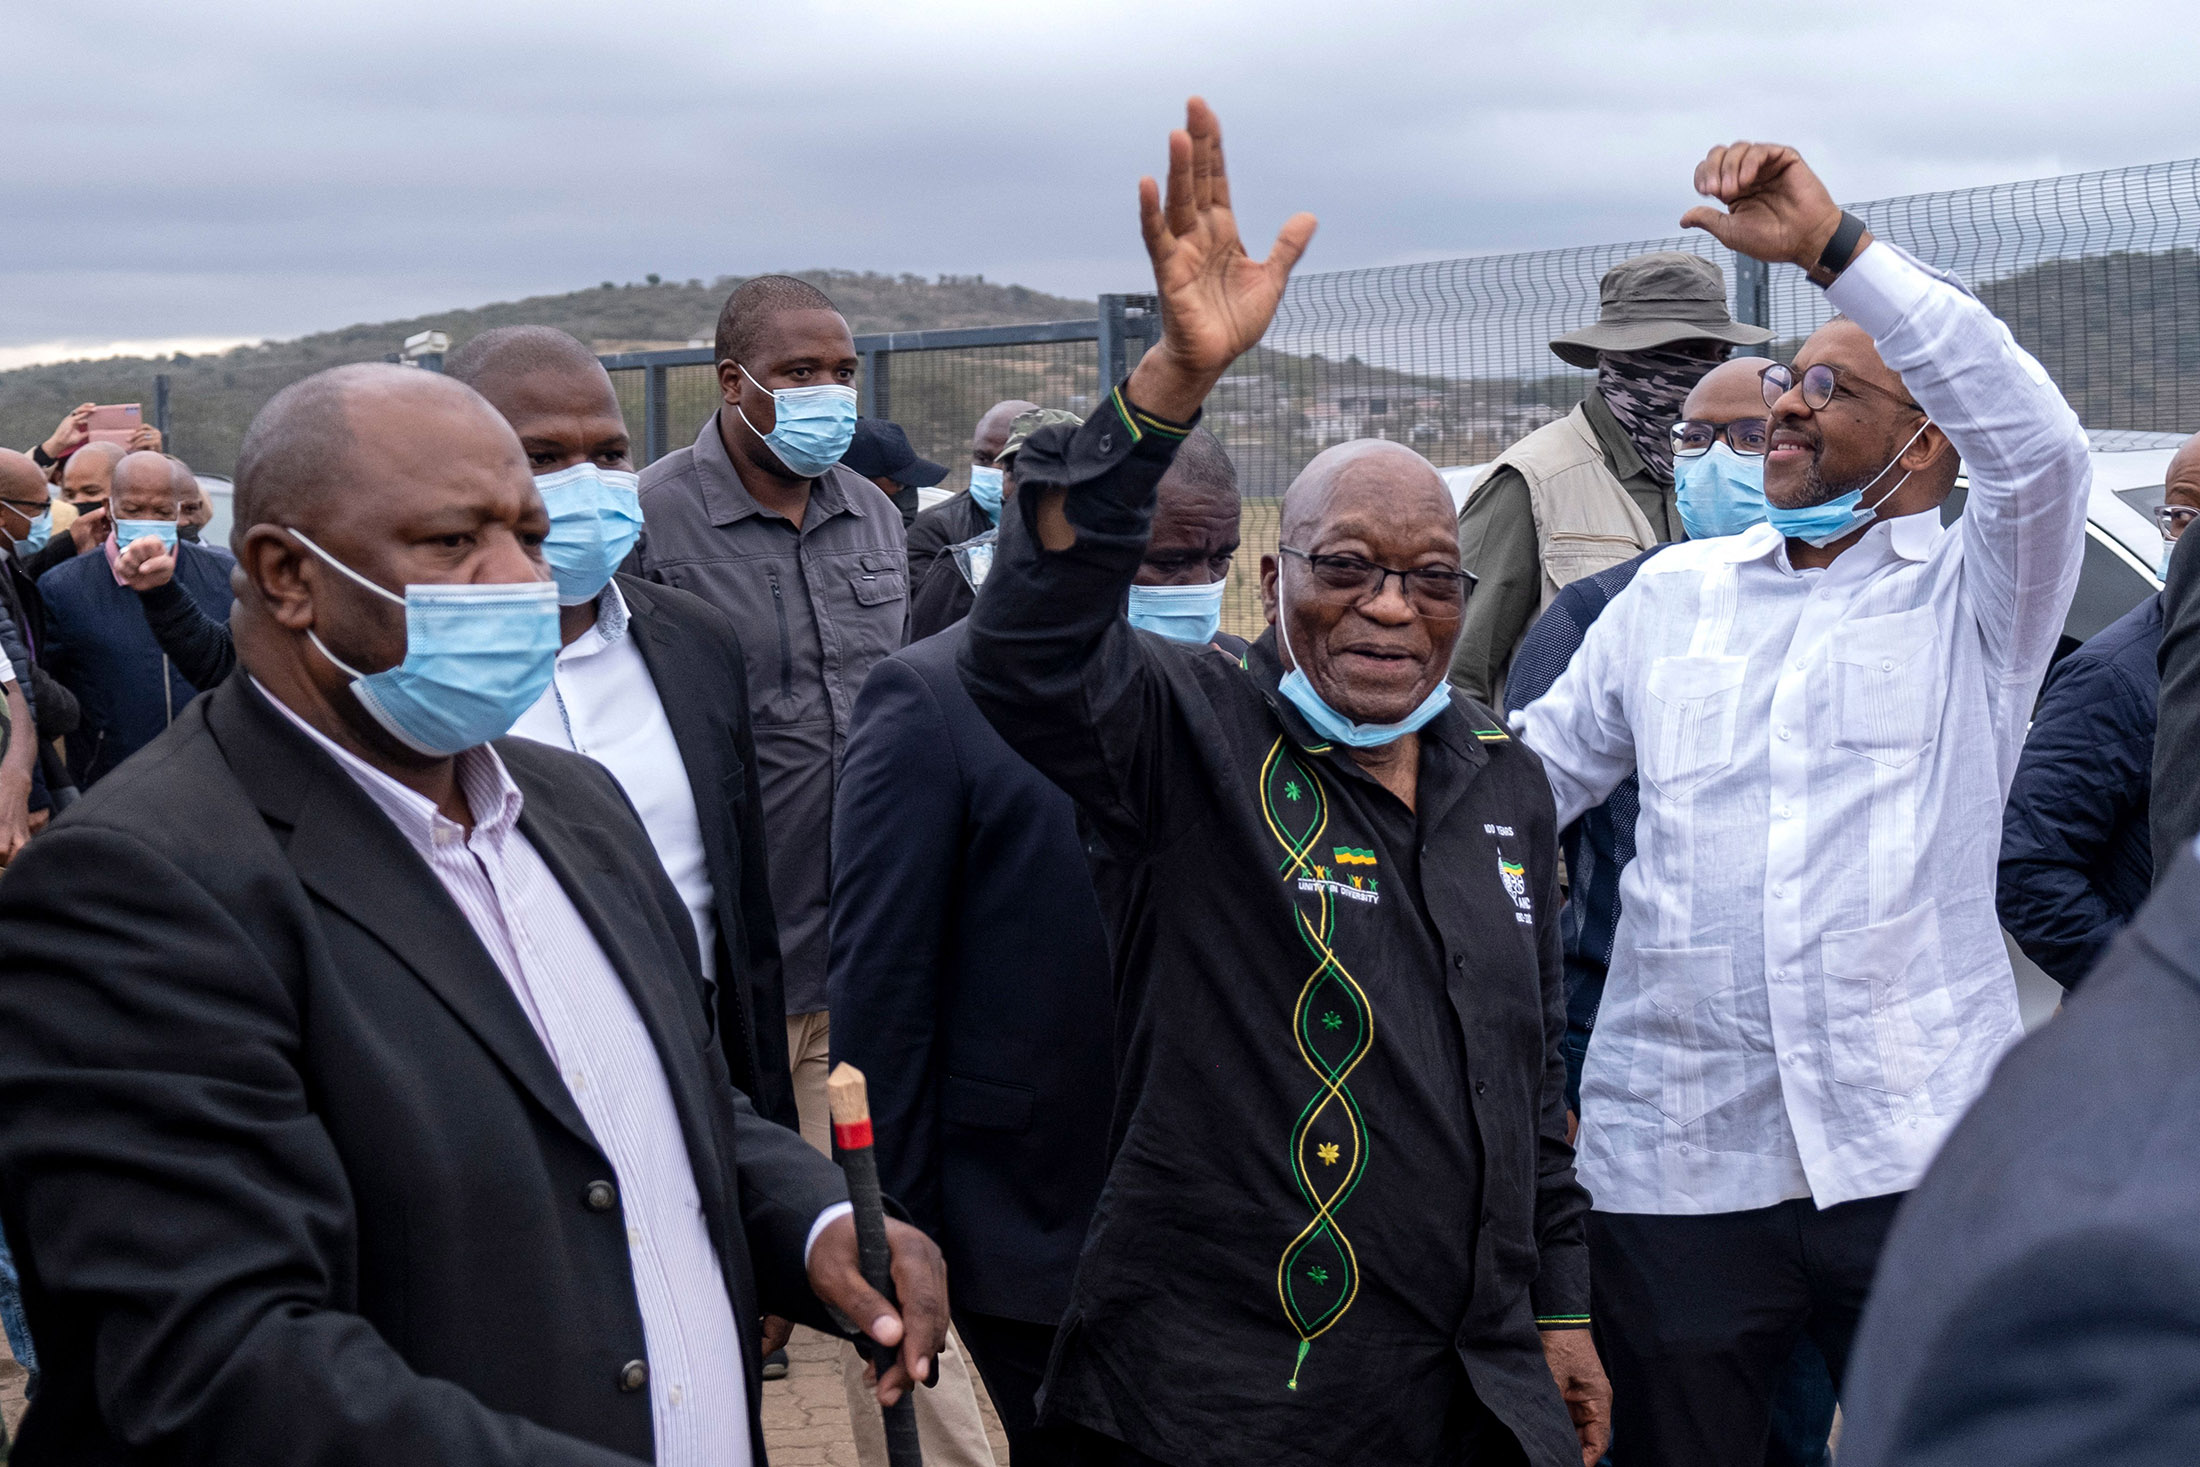 Jacob Zuma, Former South African President, Is Arrested - The New